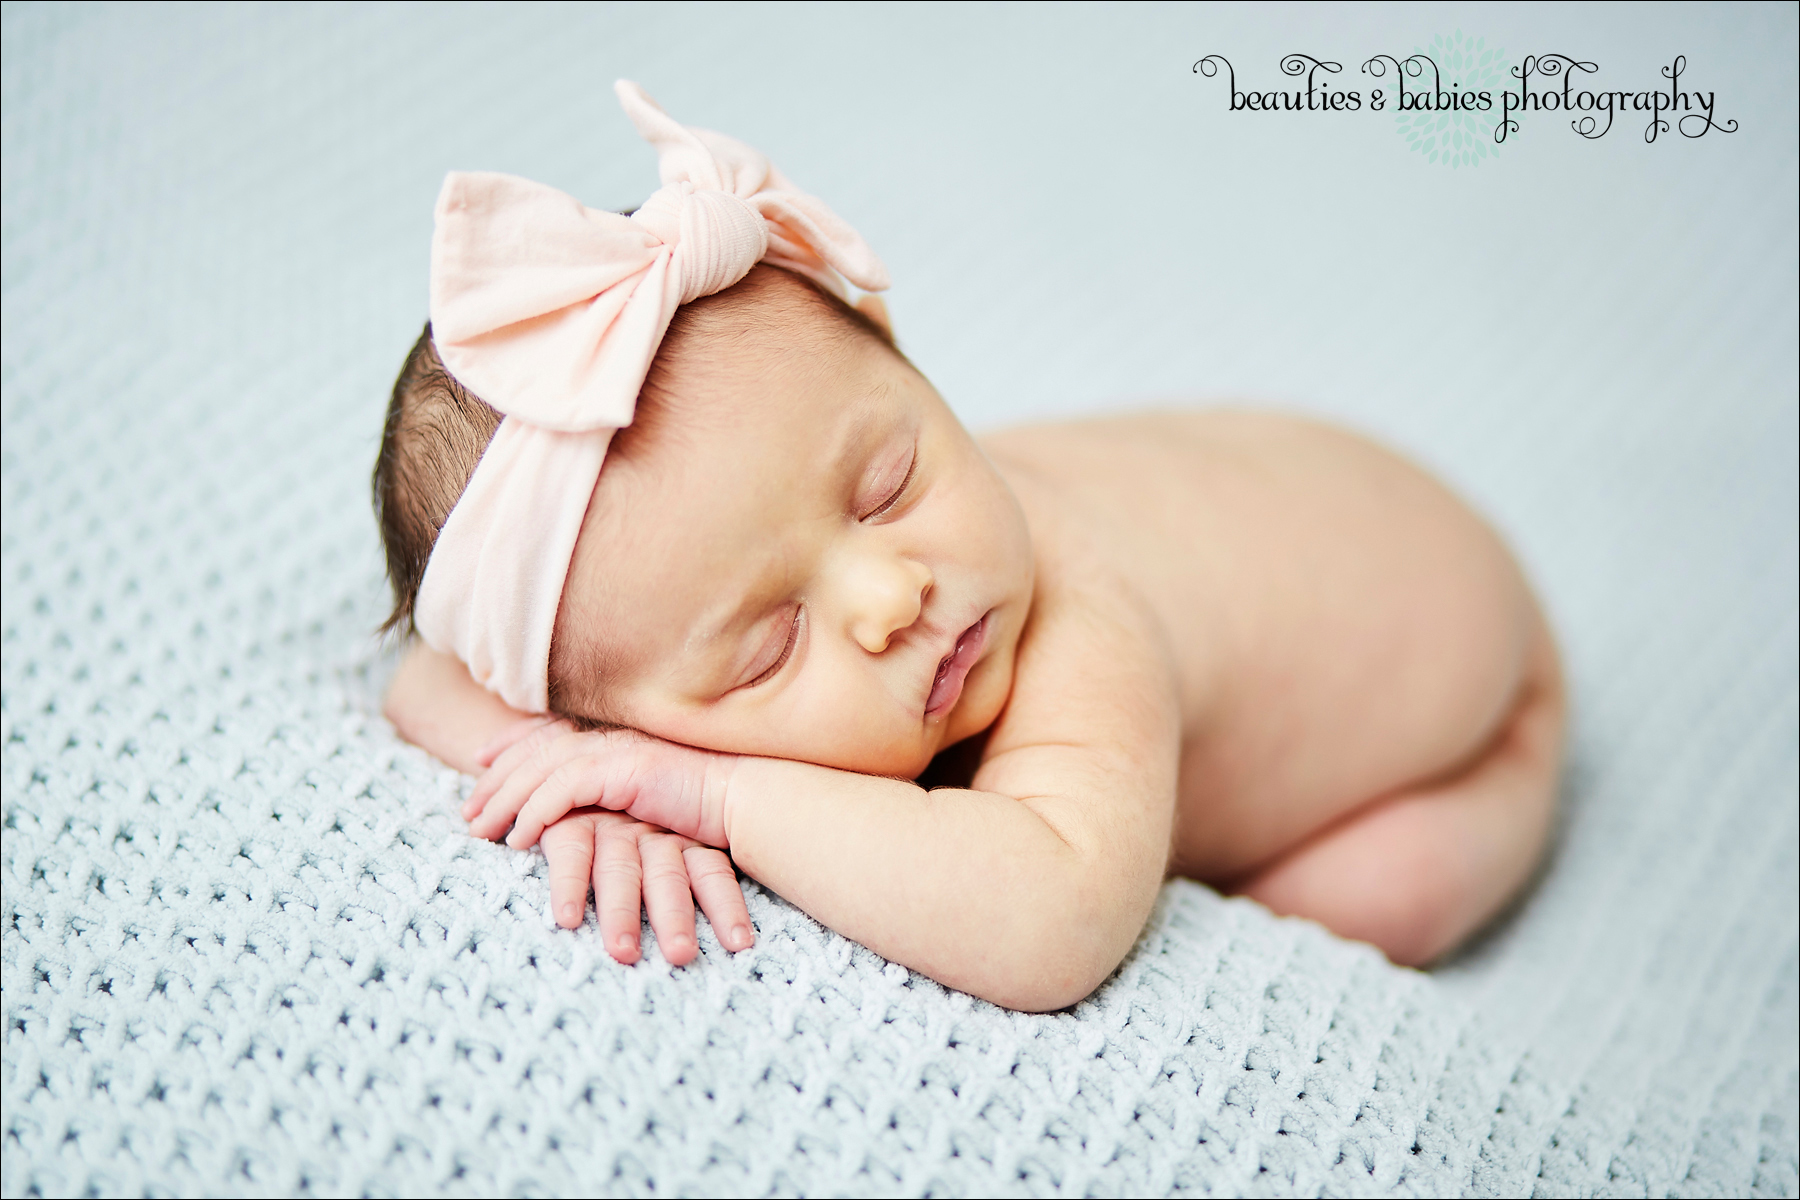 At-home newborn baby and family photography session professional portrait and lifestyle photographer Los Angeles